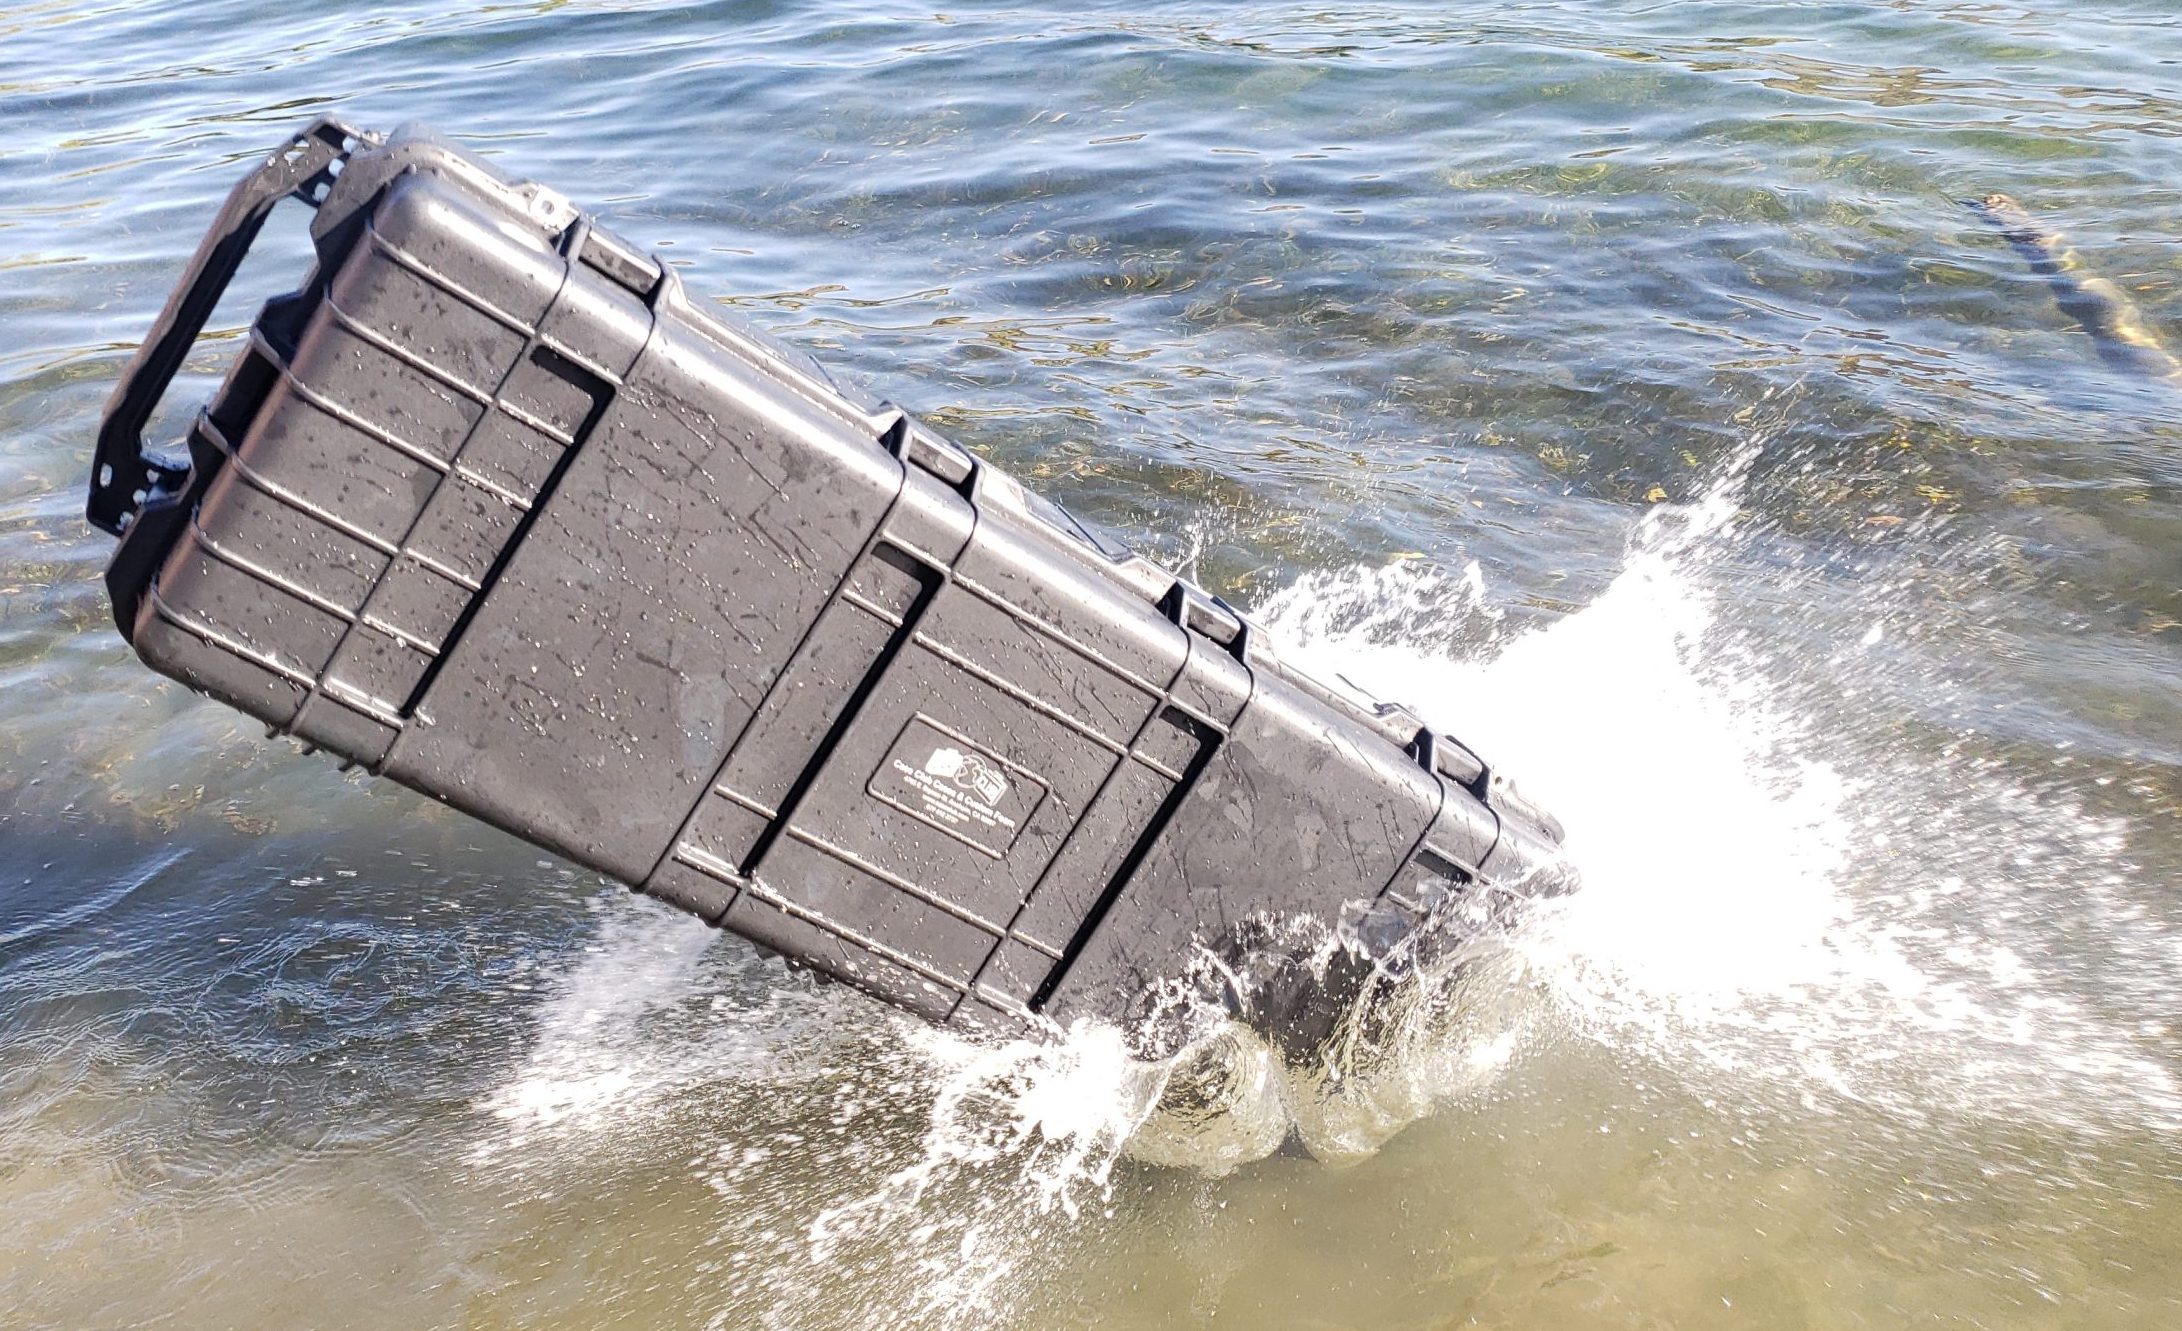 How Should Firearms Be Transported in a Boat? Essential Safety Guidelines